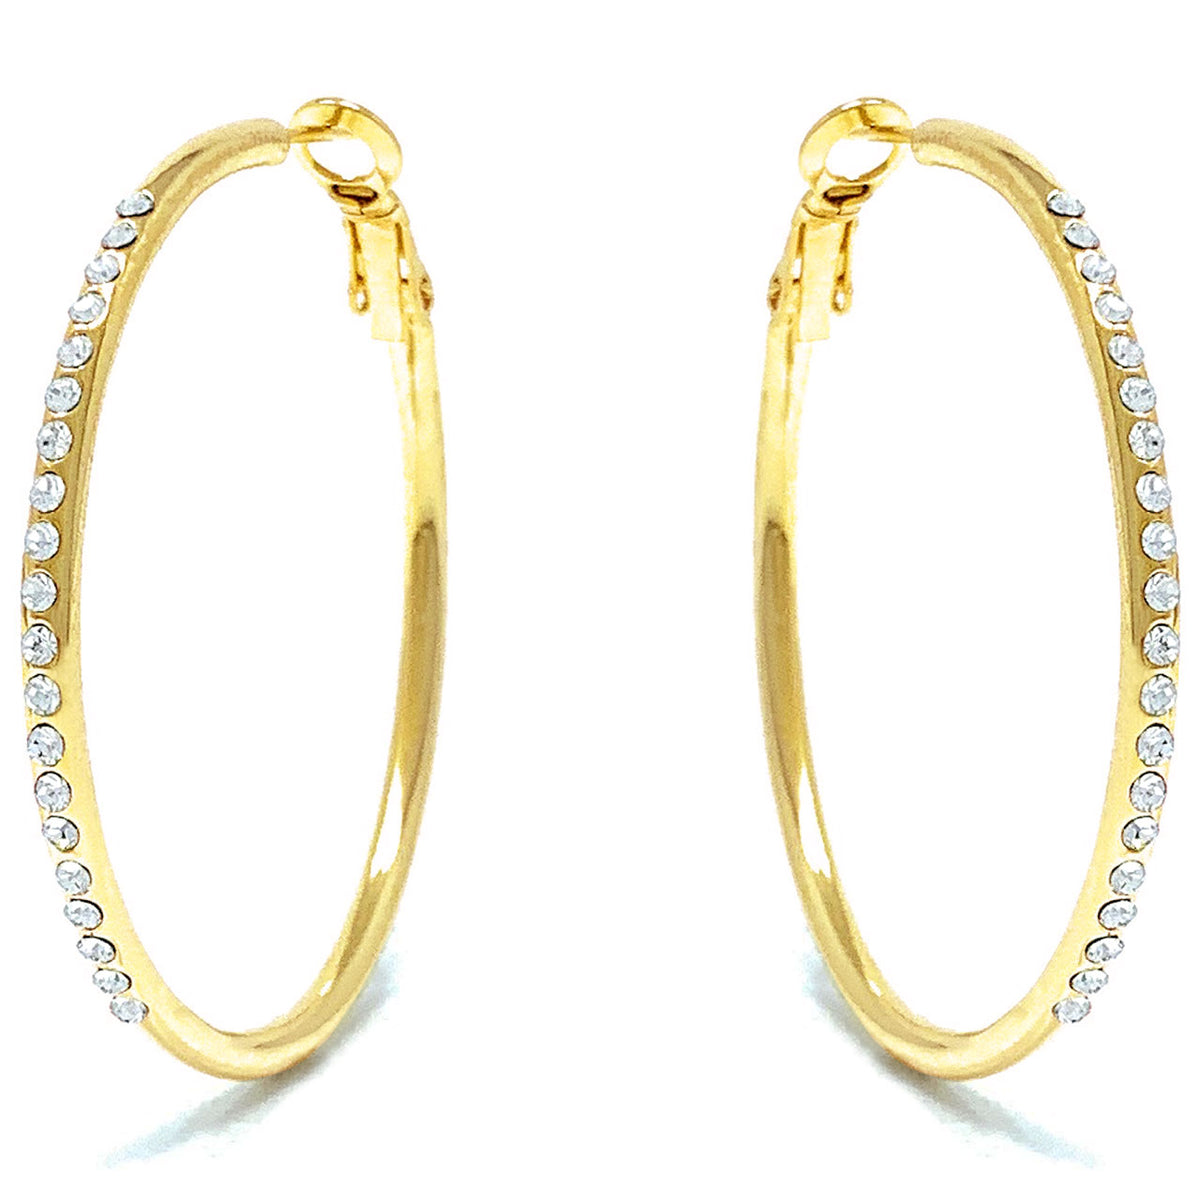 Amelia Large Pave Hoop Earrings with White Clear Round Crystals from Swarovski Gold Plated - Ed Heart